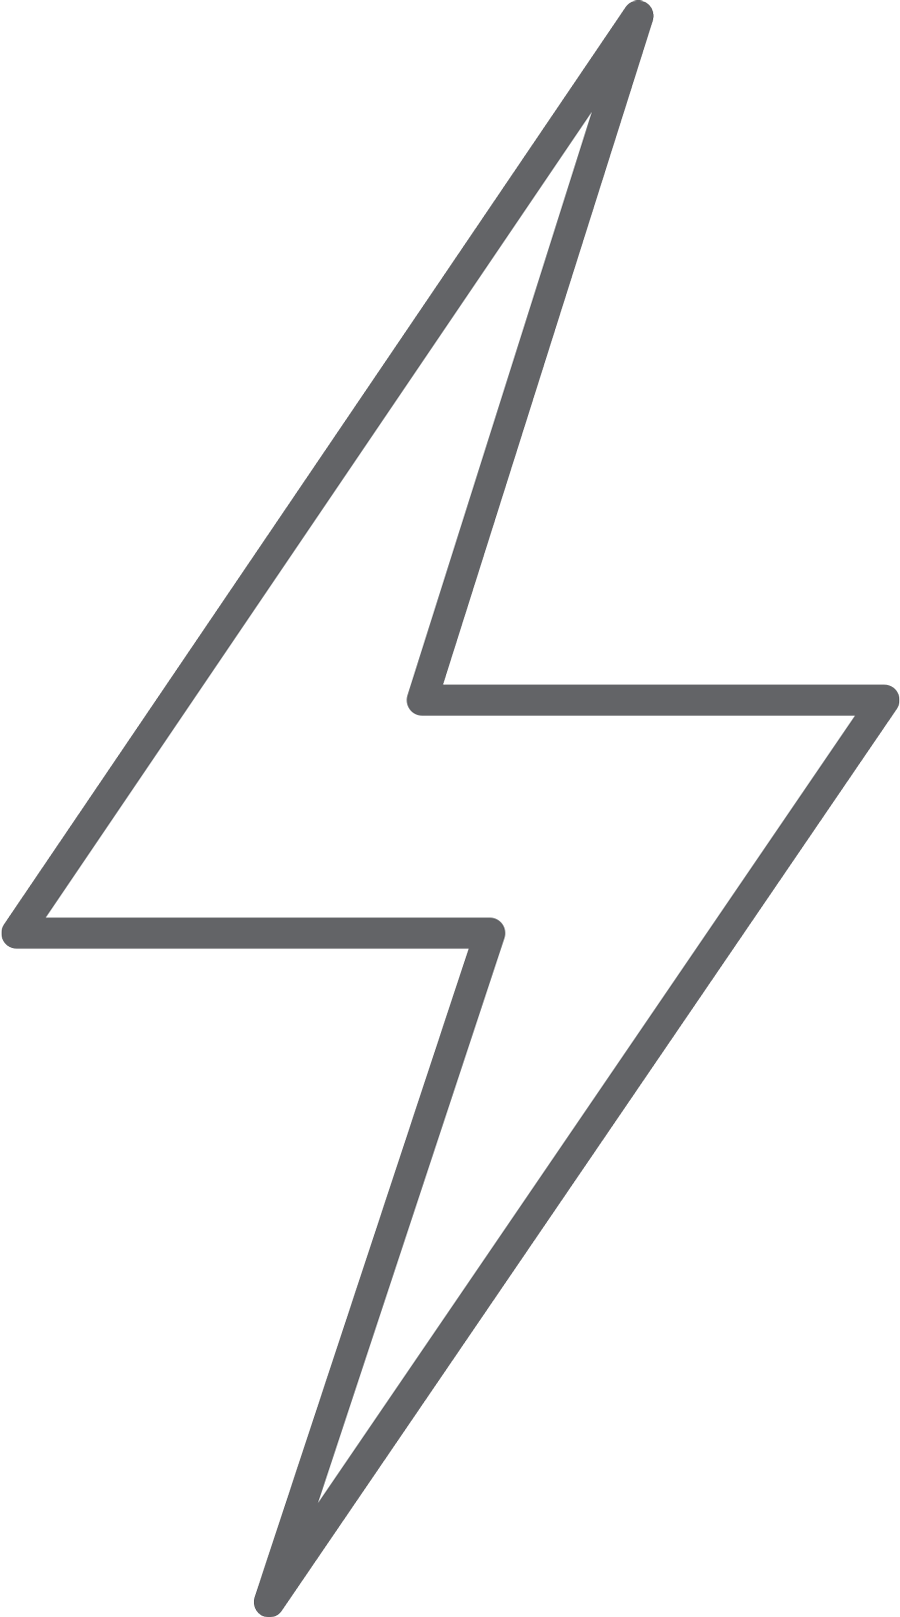 icon of a lightning bolt